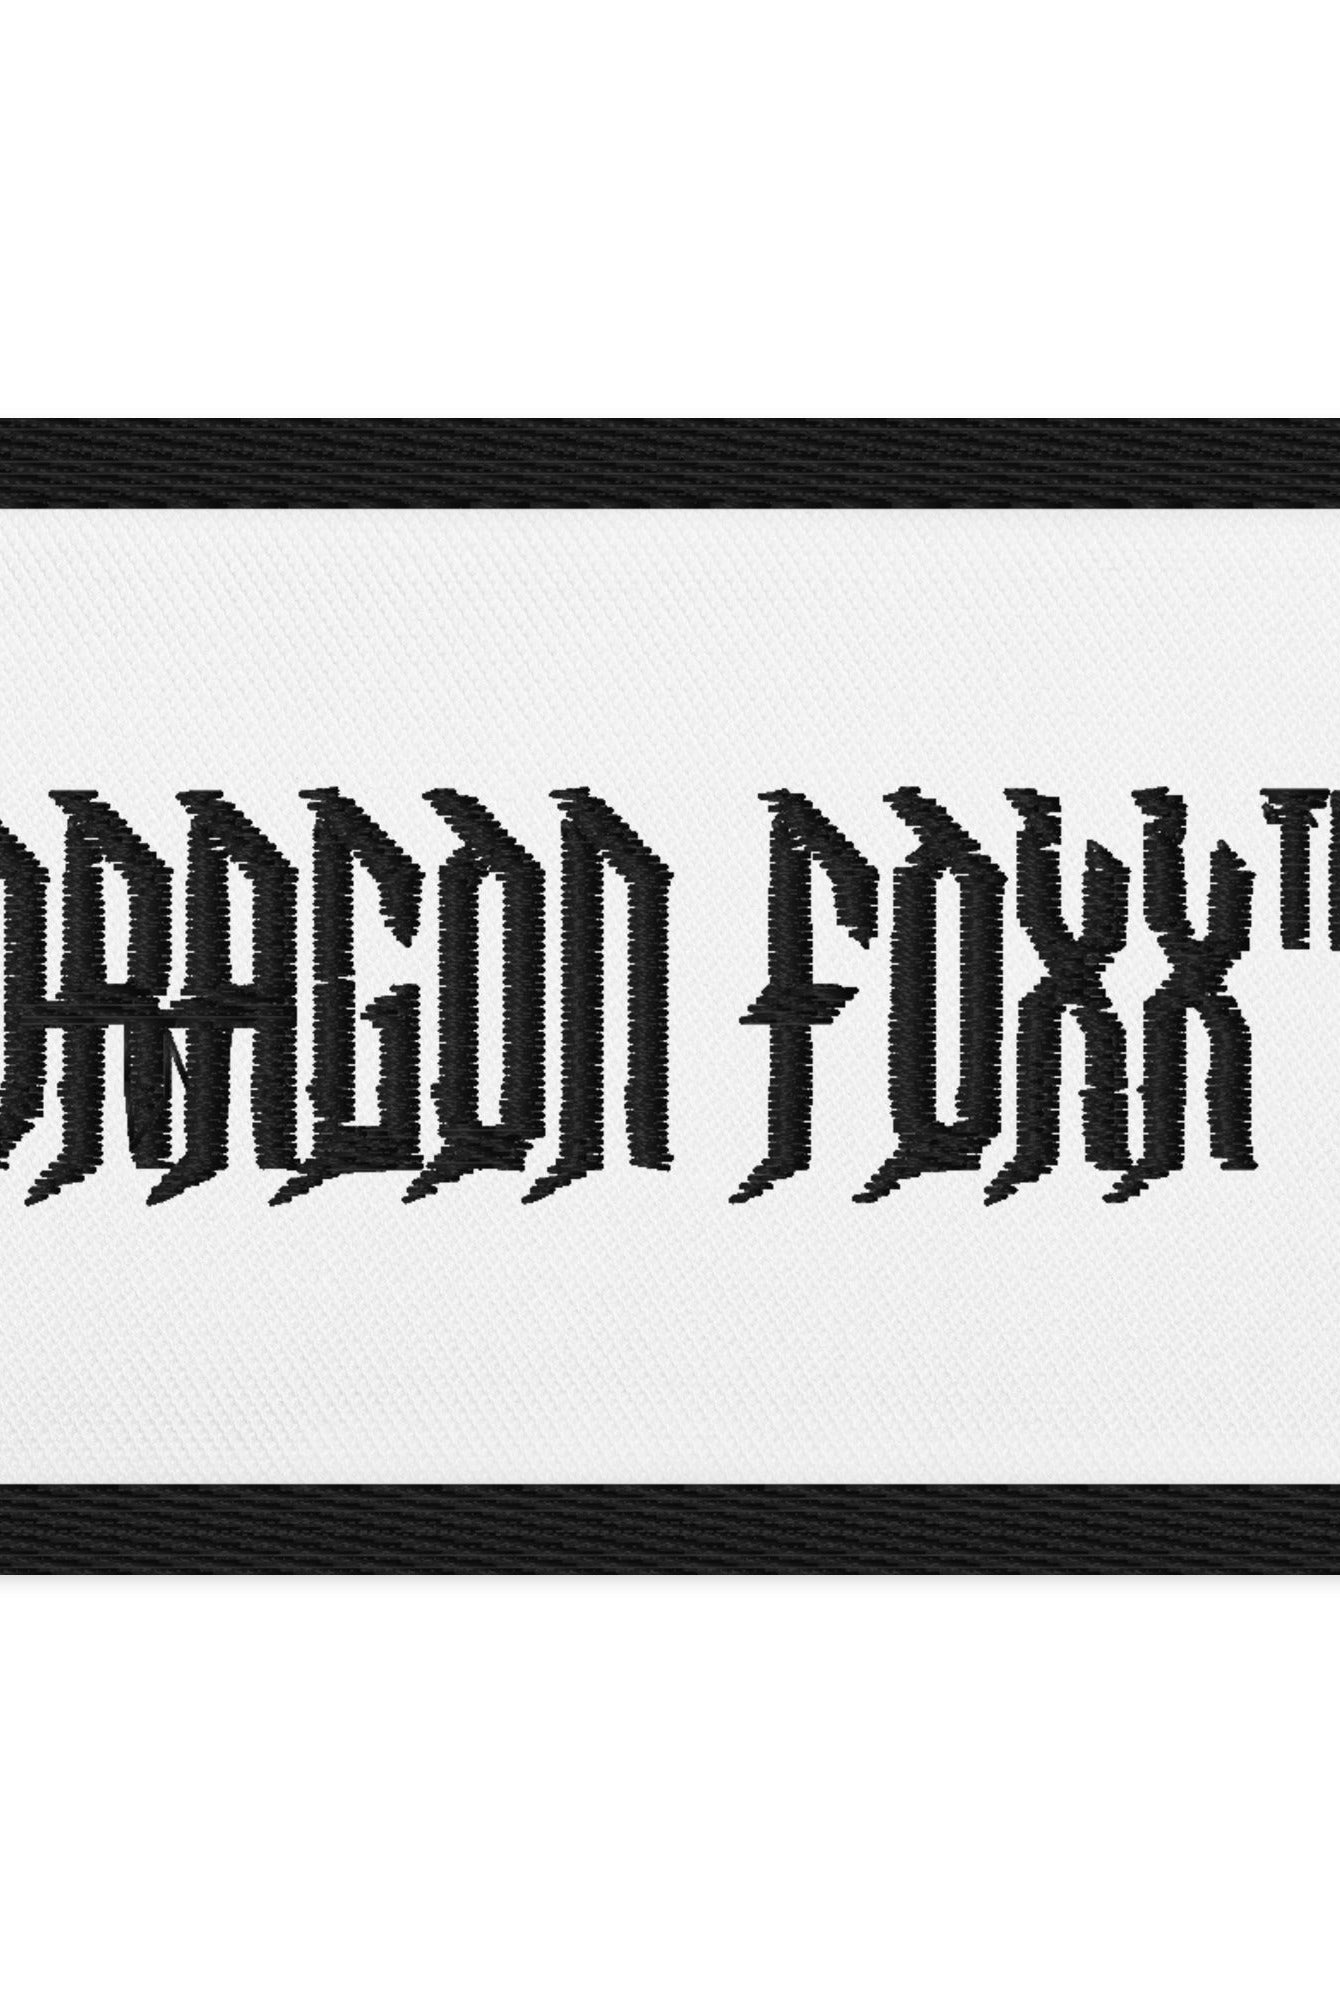 Dragon Foxx™ Embroidered White and Black Patch - Dragon Foxx™ Embroidered White Patch - DRAGON FOXX™ - Dragon Foxx™ Embroidered White and Black Patch - 3662437_15565 - White/Black - 3″ (7.6 cm) in diameter - 3" Patch - Accessories - Clothing Patch